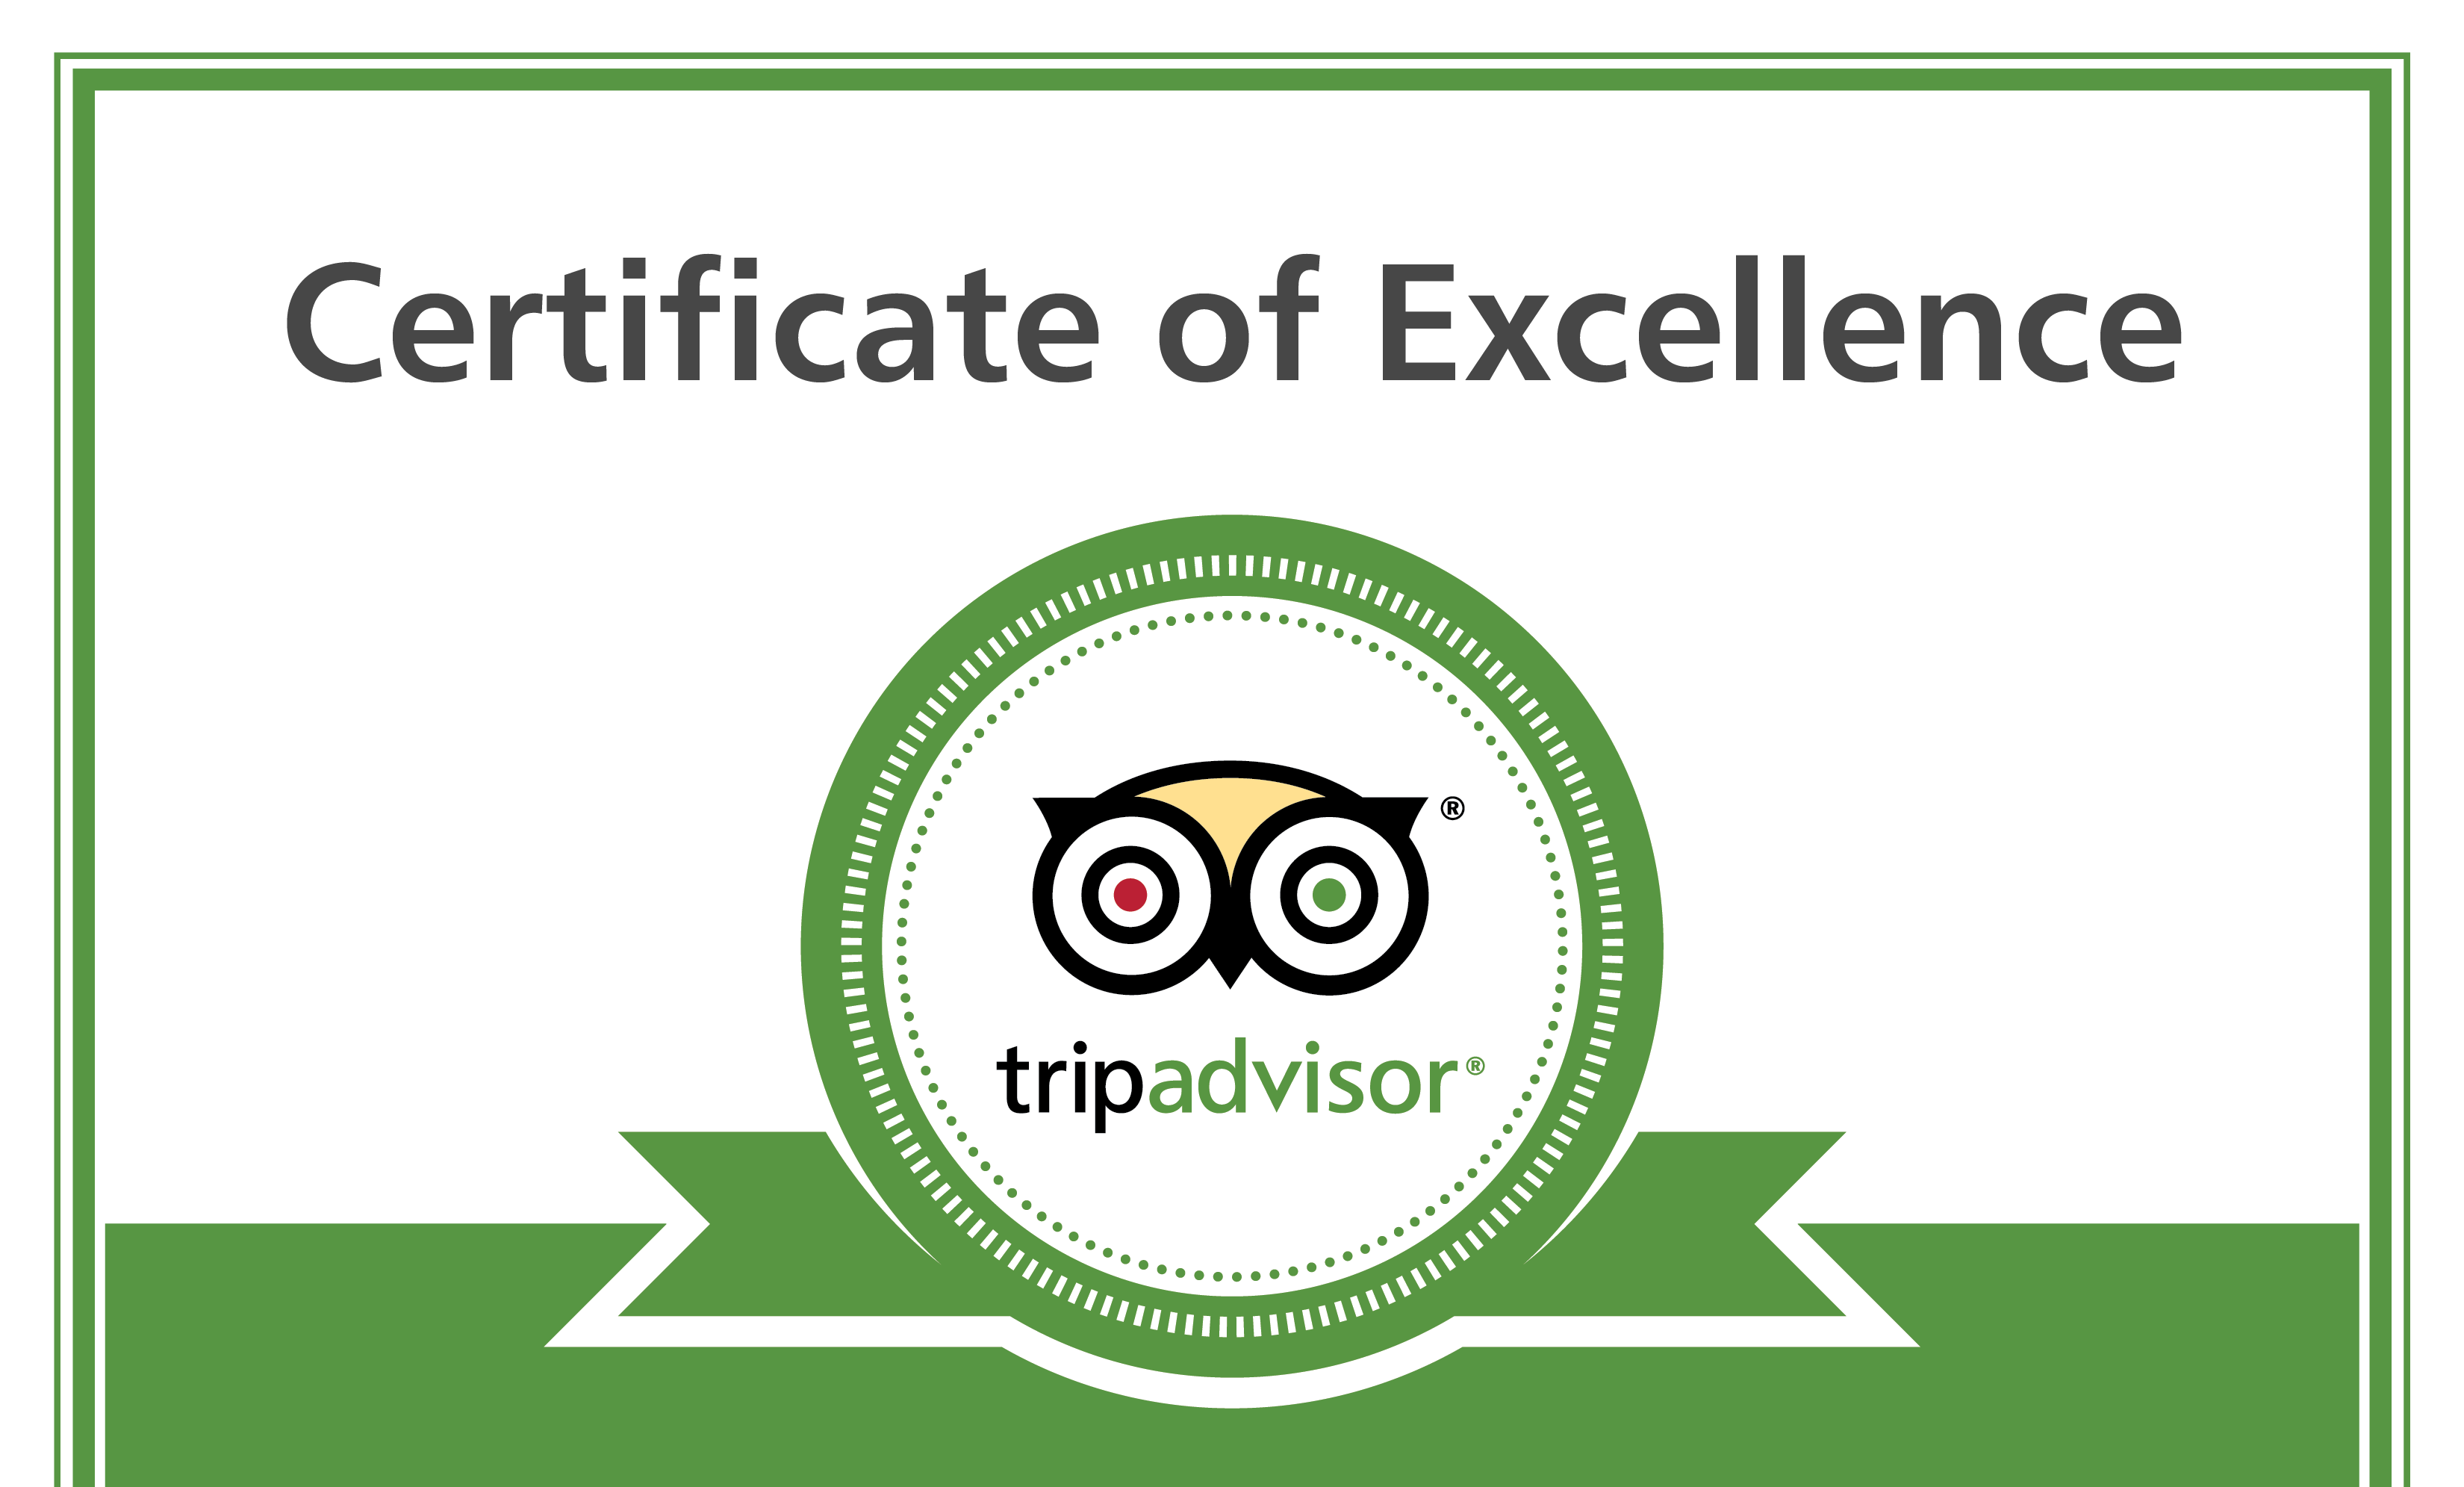 I’m proud of my consistent 5-star rating in TripAdvisor: Click to see the independently reviewed comments.